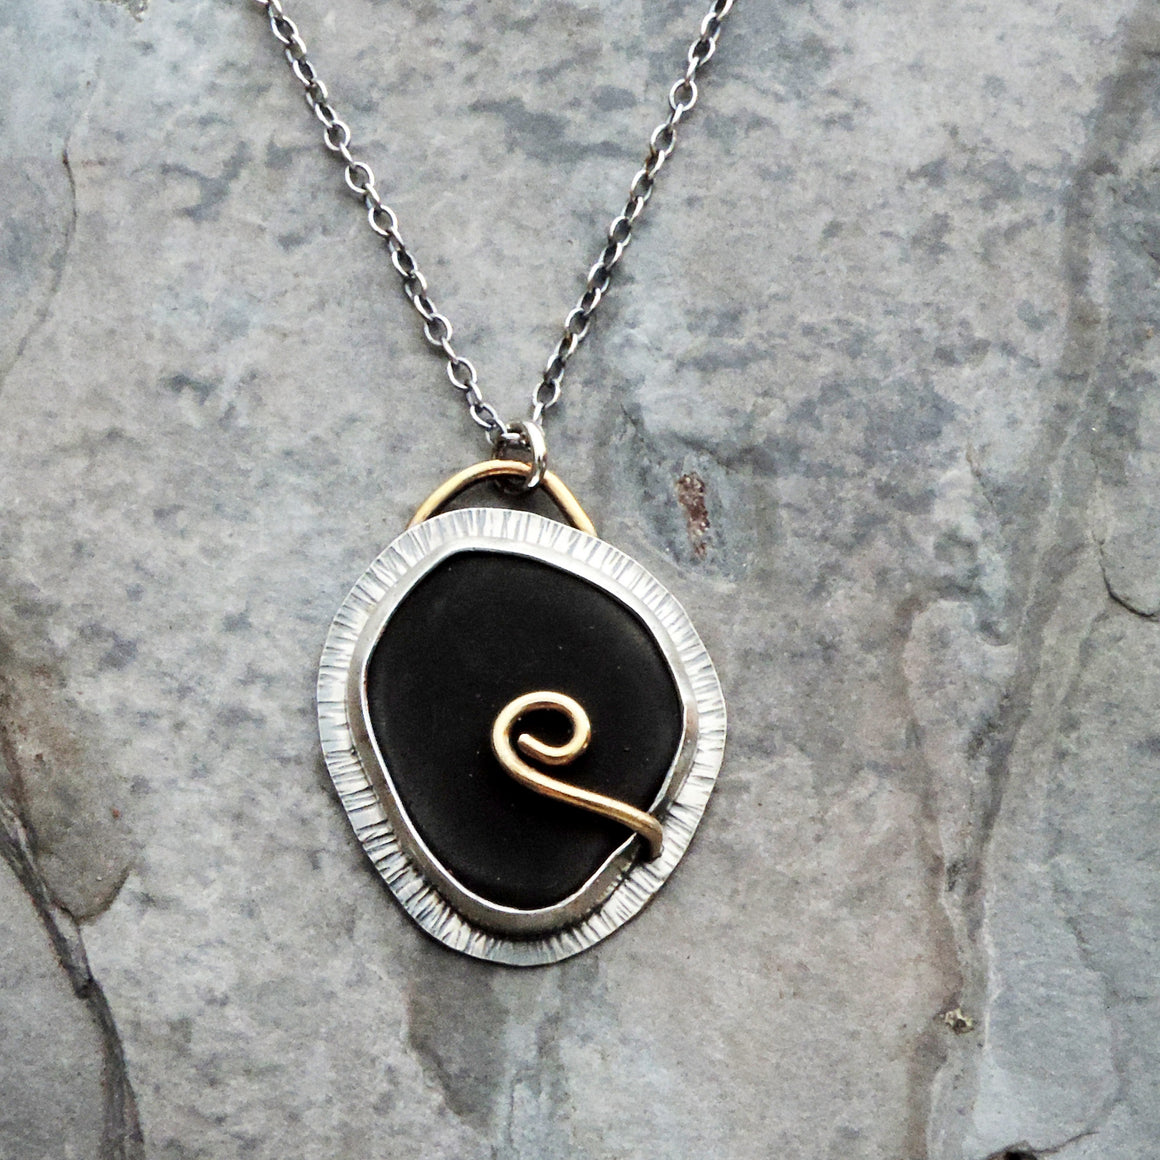 black silver and gold pendant necklace